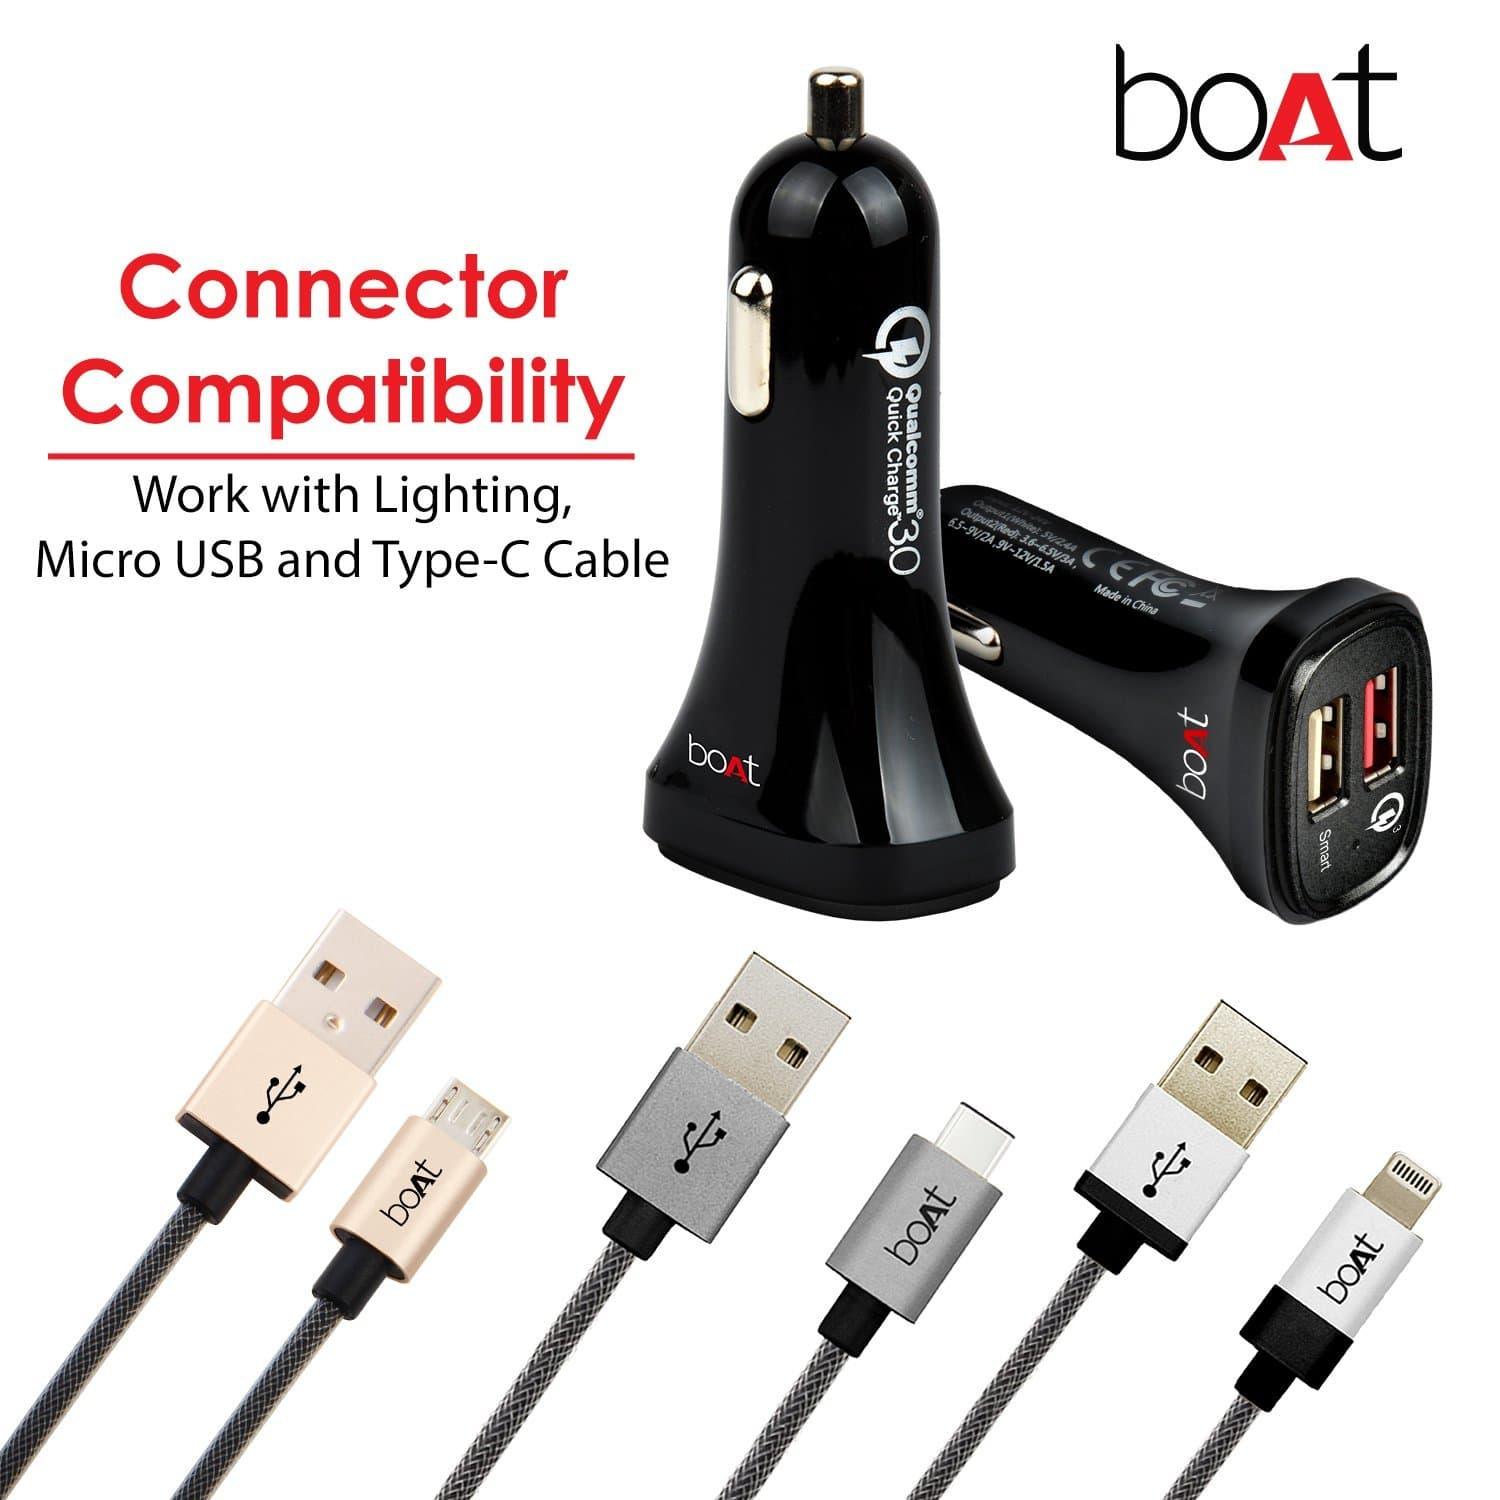 boAt Dual Port Rapid Car Charger Smart Charging with Quick Charge 3.0 Type C USB Cable Black-Car charger-dealsplant